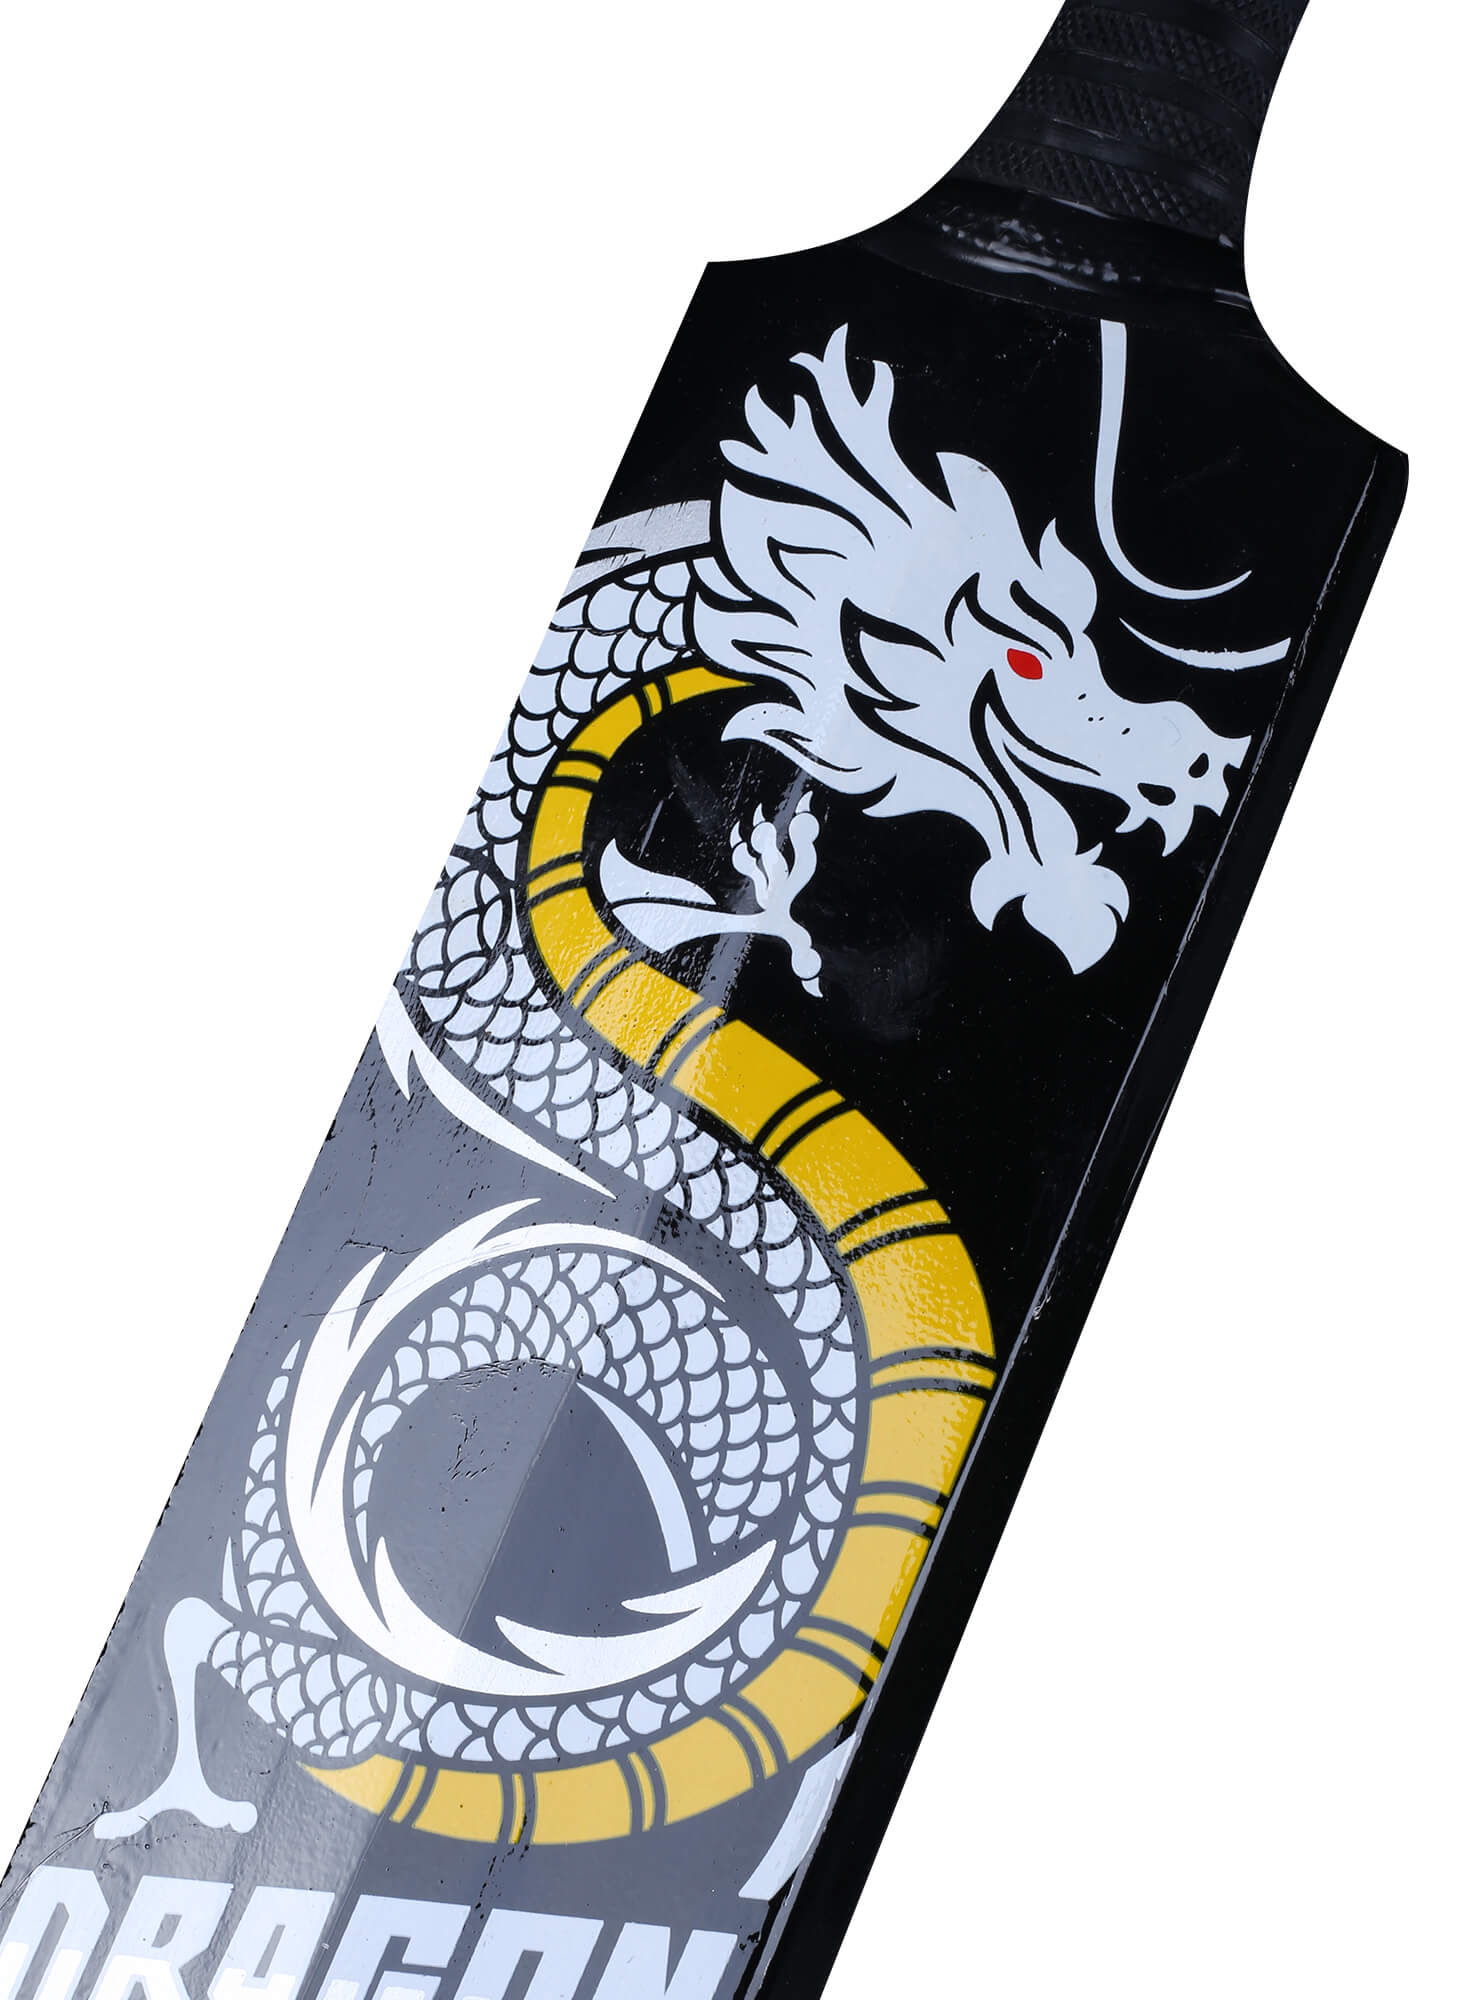 CA Dragon Power-TEK ultra-modern bat, handcrafted from popular willow, designed for heavy hitters with a lightweight aerodynamic shape, double-colored camo grip, and Power-Tek technology.